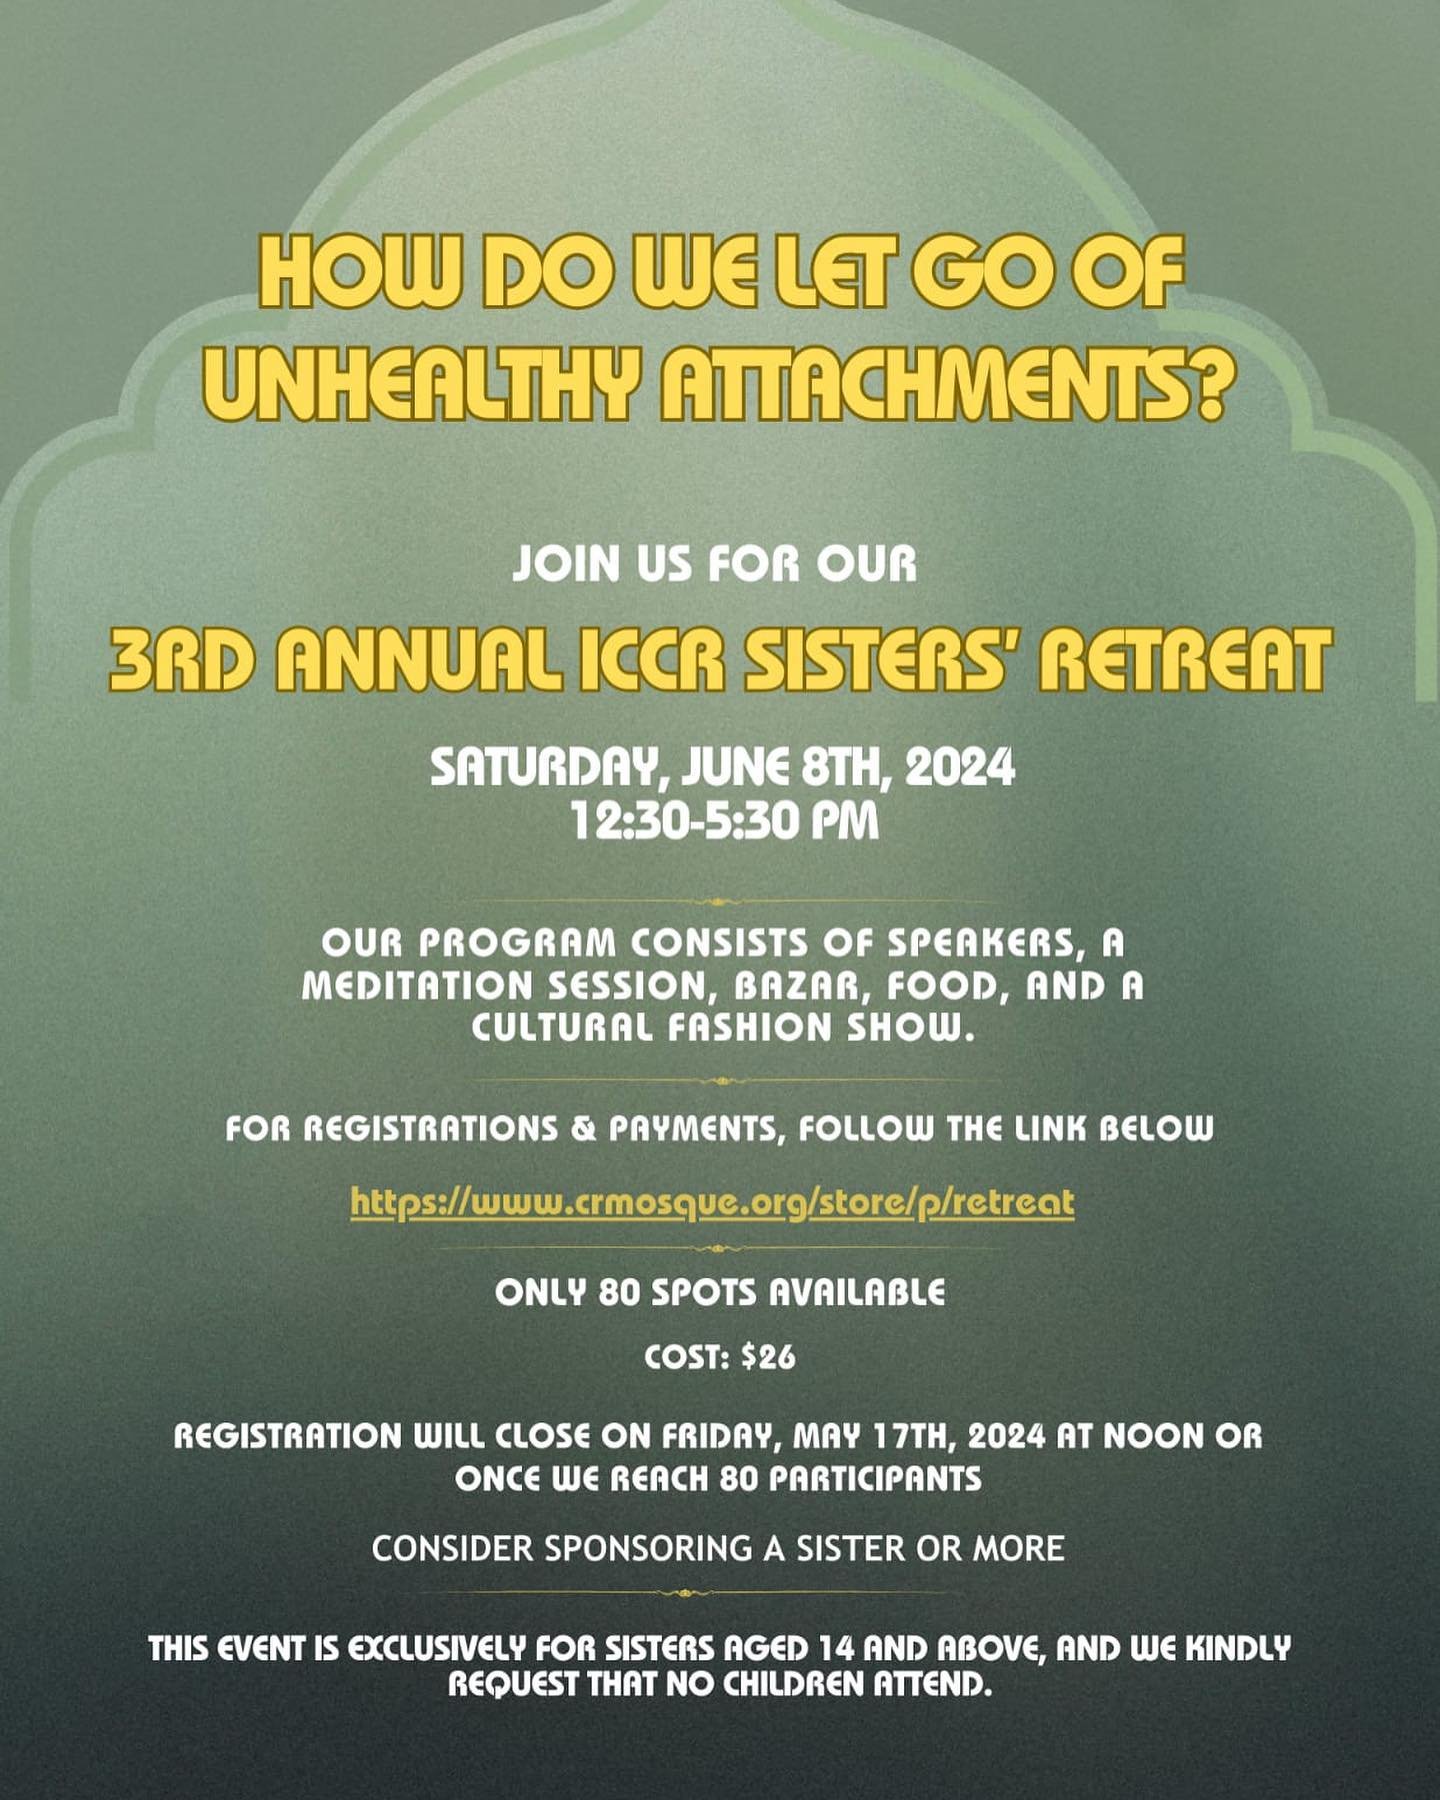 🌟 Sisters, mark your calendars! 🗓️ Join us for a day of spiritual growth and community at our 3rd Annual ICCR Sisters&rsquo; Retreat on June 8th, 2024. Limited spots available. Secure your place now! Link to register is in bio 🌺 #ICCRSistersRetrea